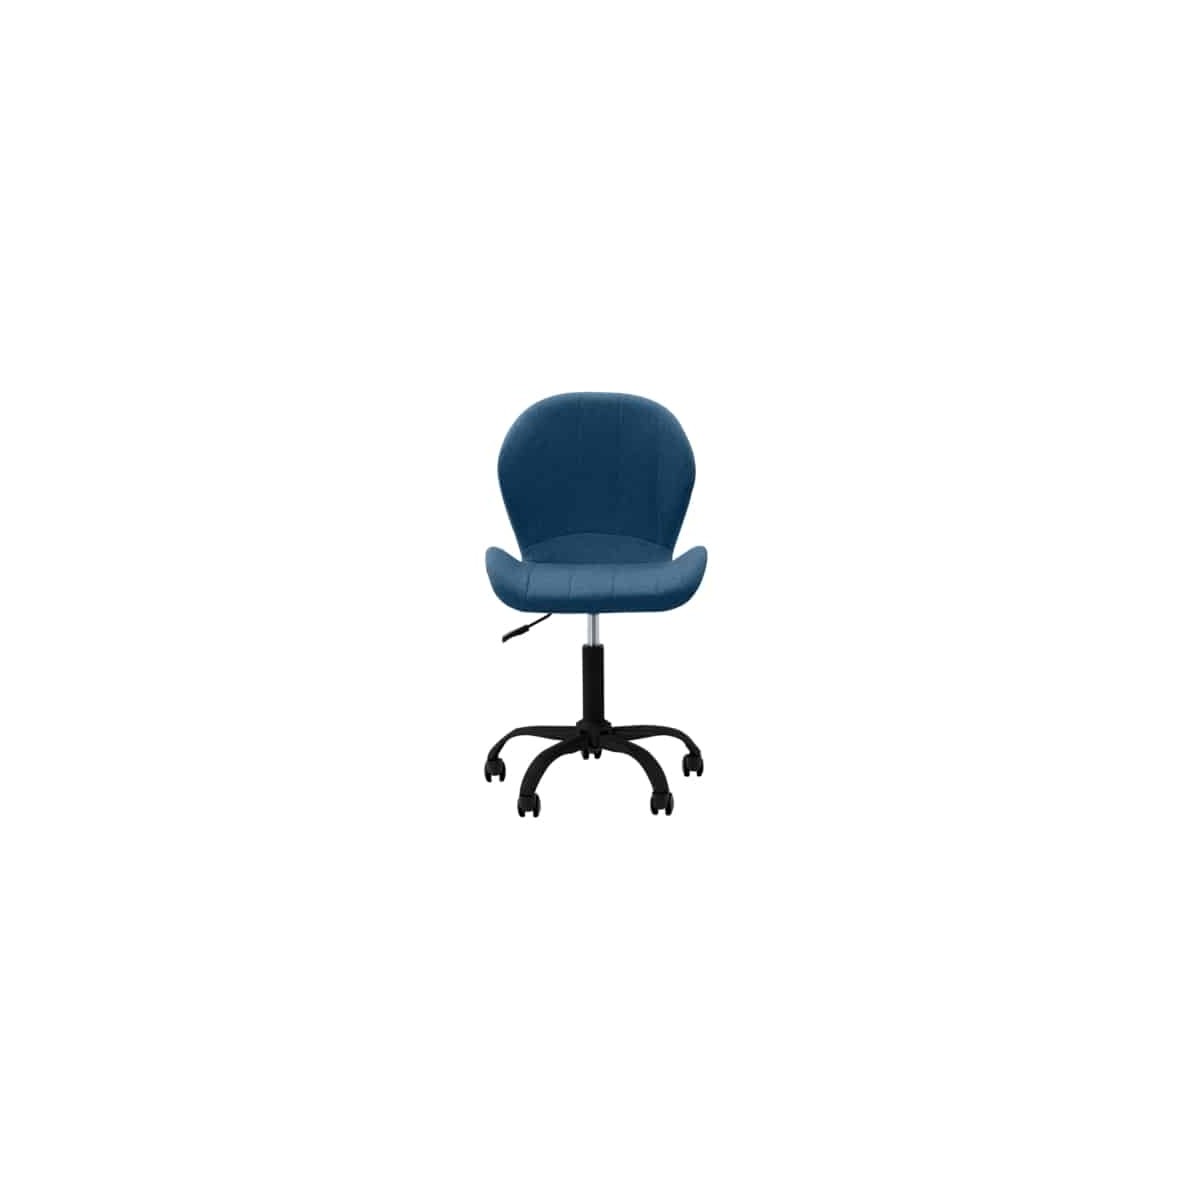 Fabric office chair with black legs (Petrol blue)